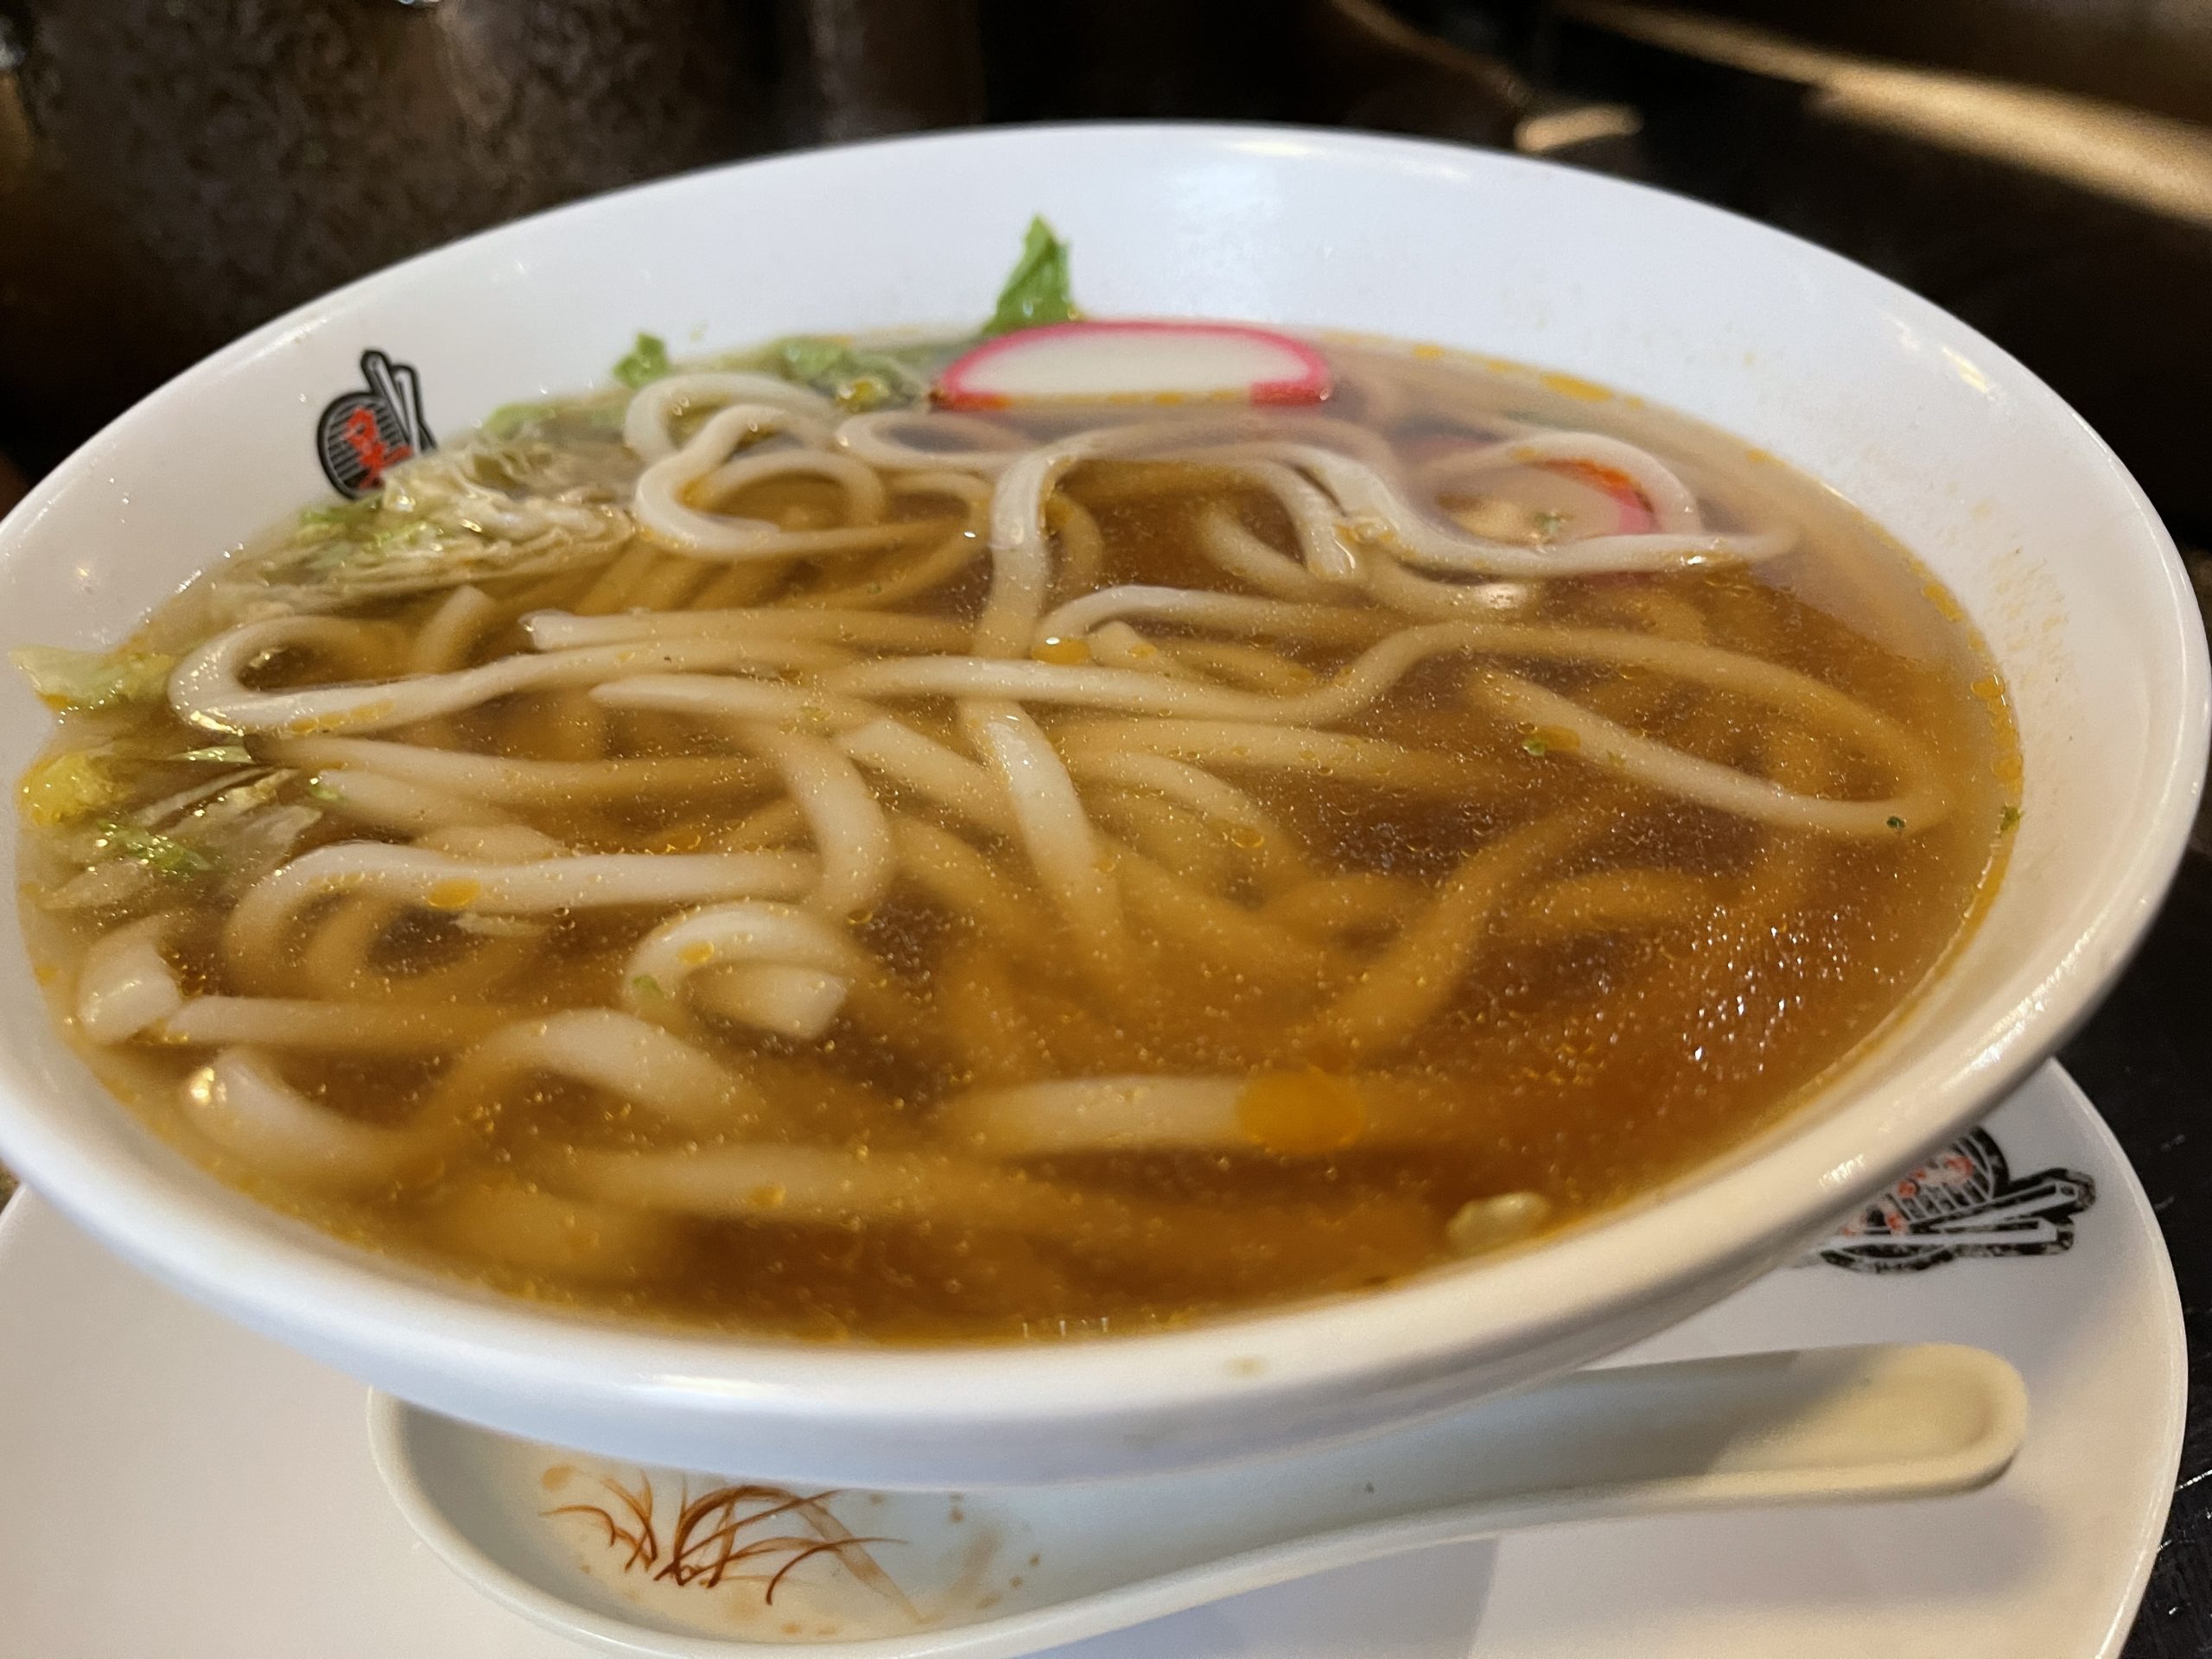 Wu's House - Chicken Udon Noodle Soup